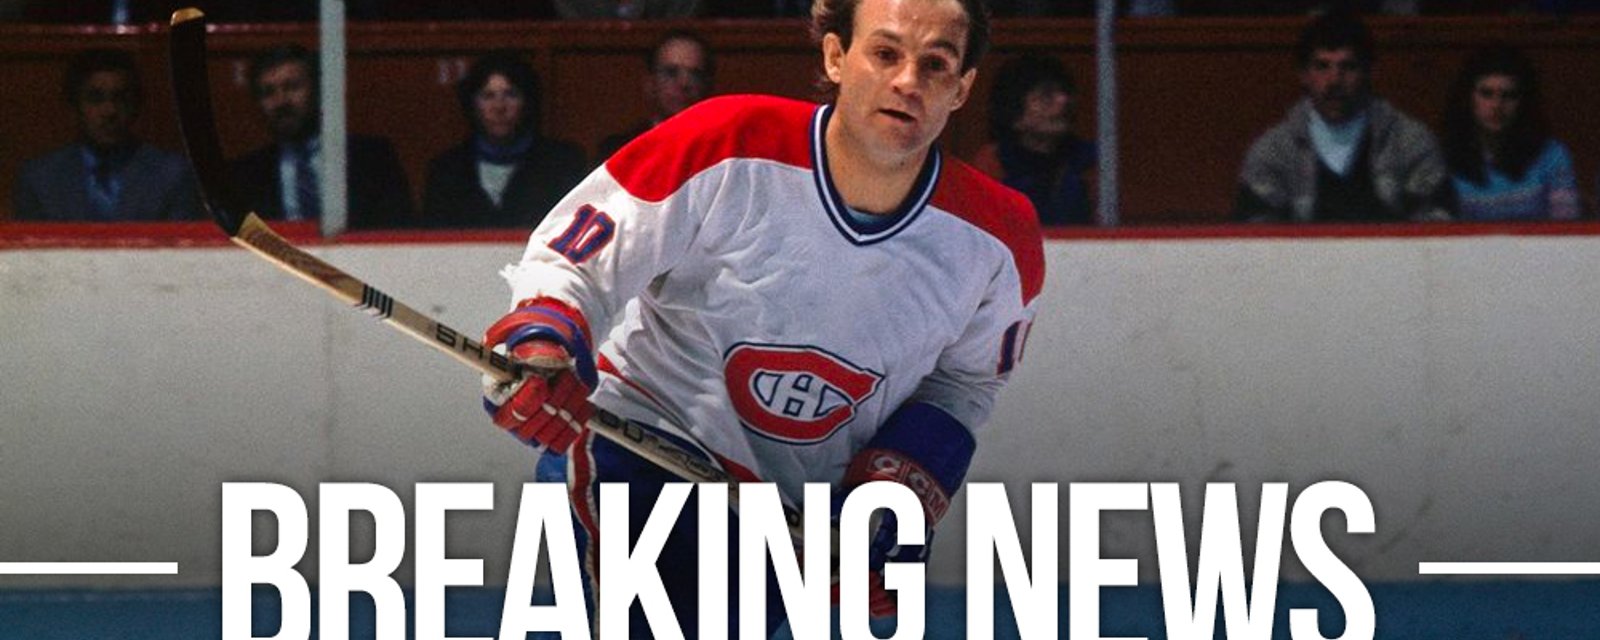 Guy Lafleur's life story to hit the big screen, movie project gets the green light